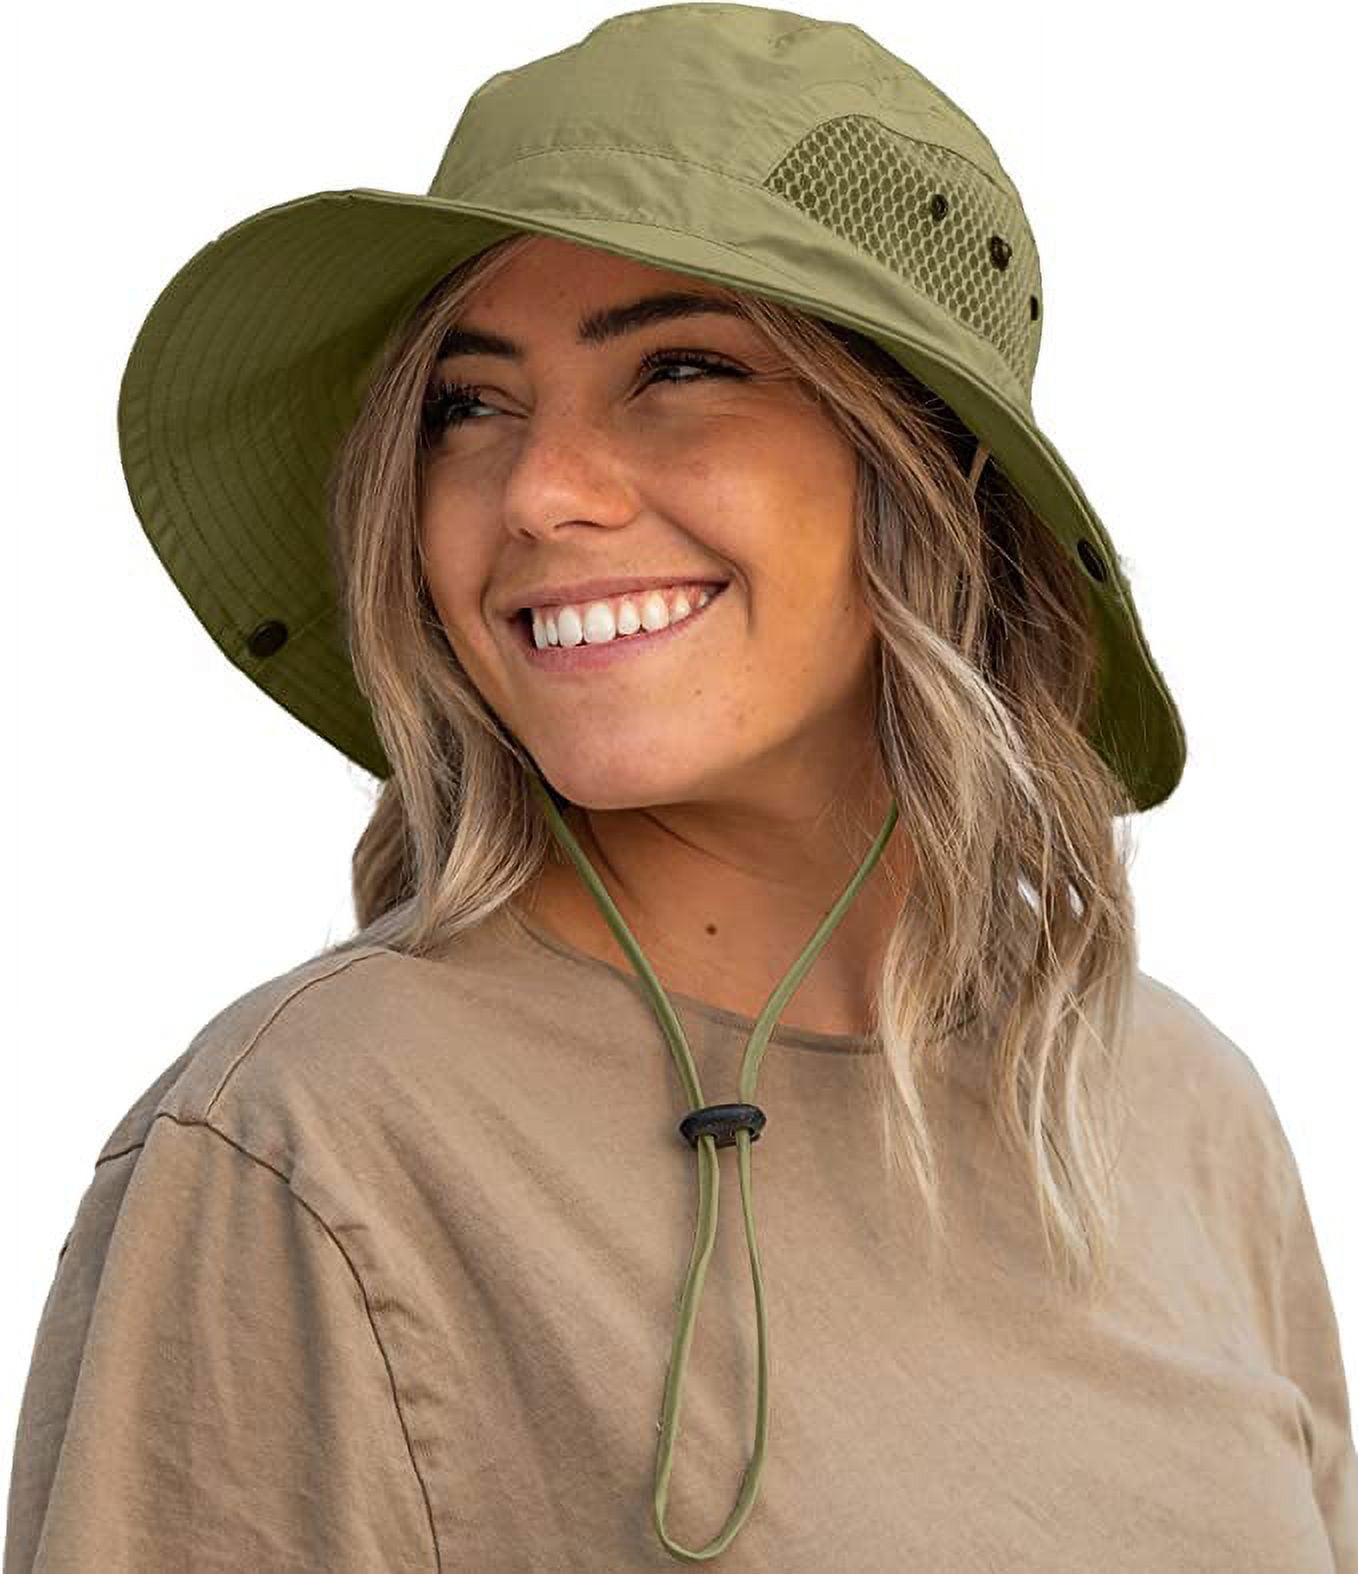 GearTOP Fishing Hats for Men and Women Sun Protection, Camping Hat Bucket  Hat with Strings Army Green